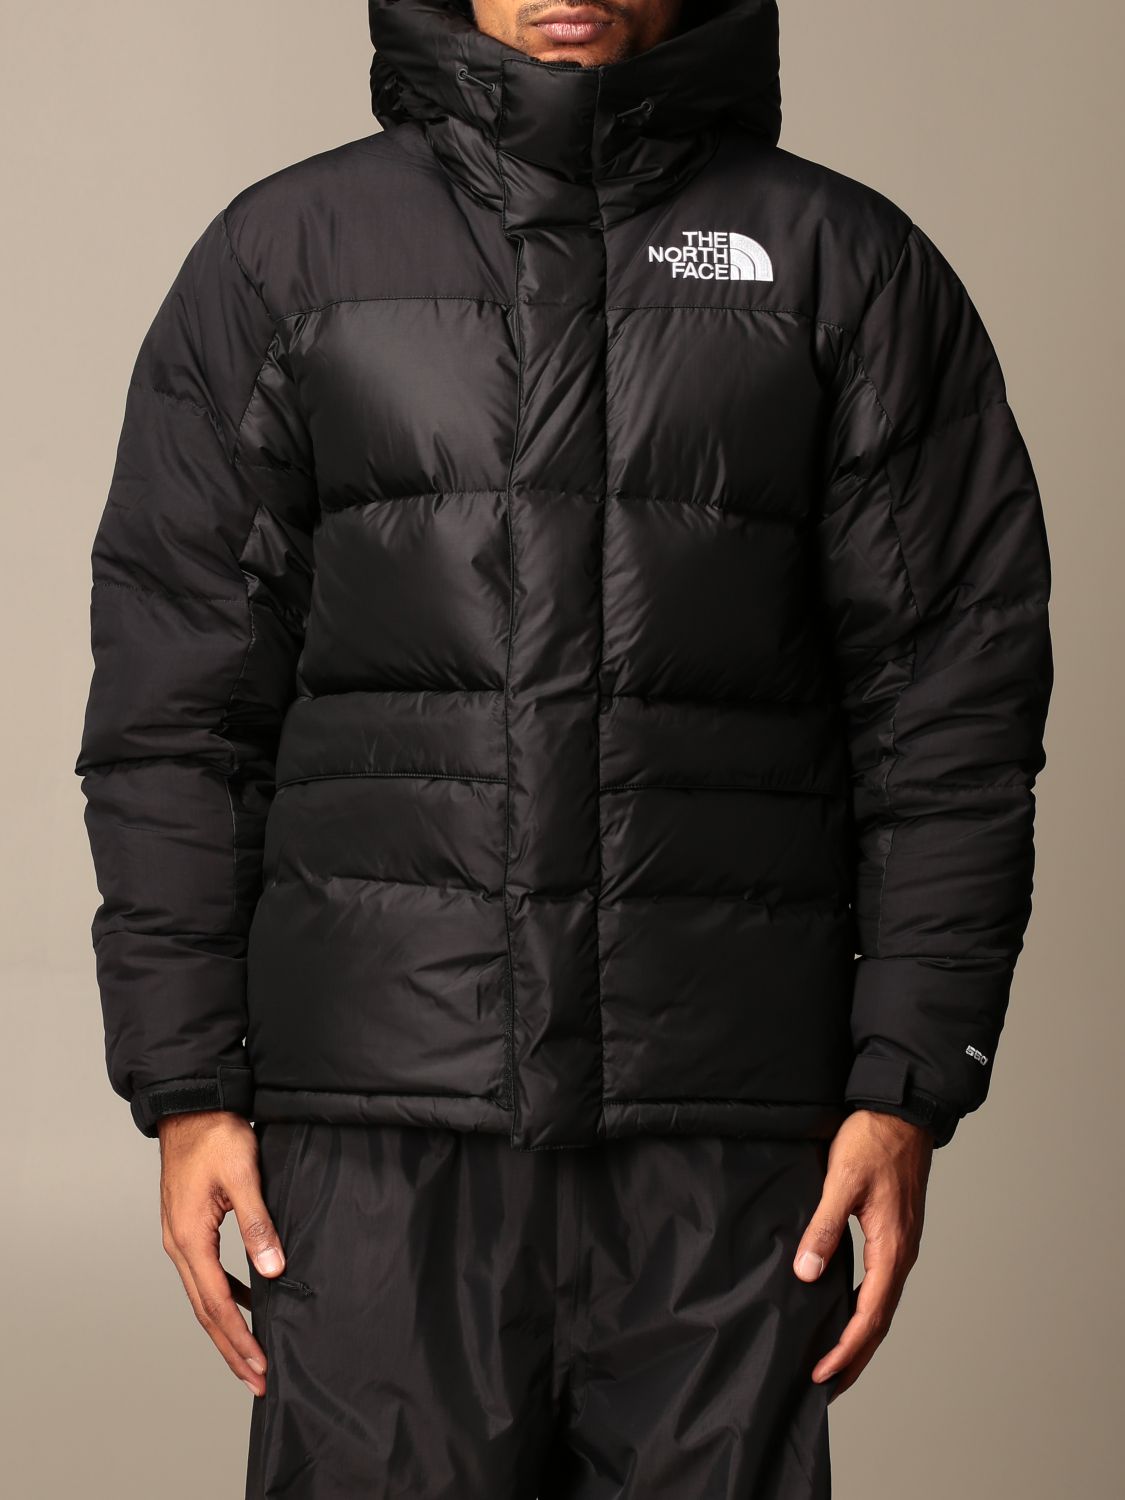 THE NORTH FACE: Jacket men - Black | Jacket The North Face NF0A4QYX ...